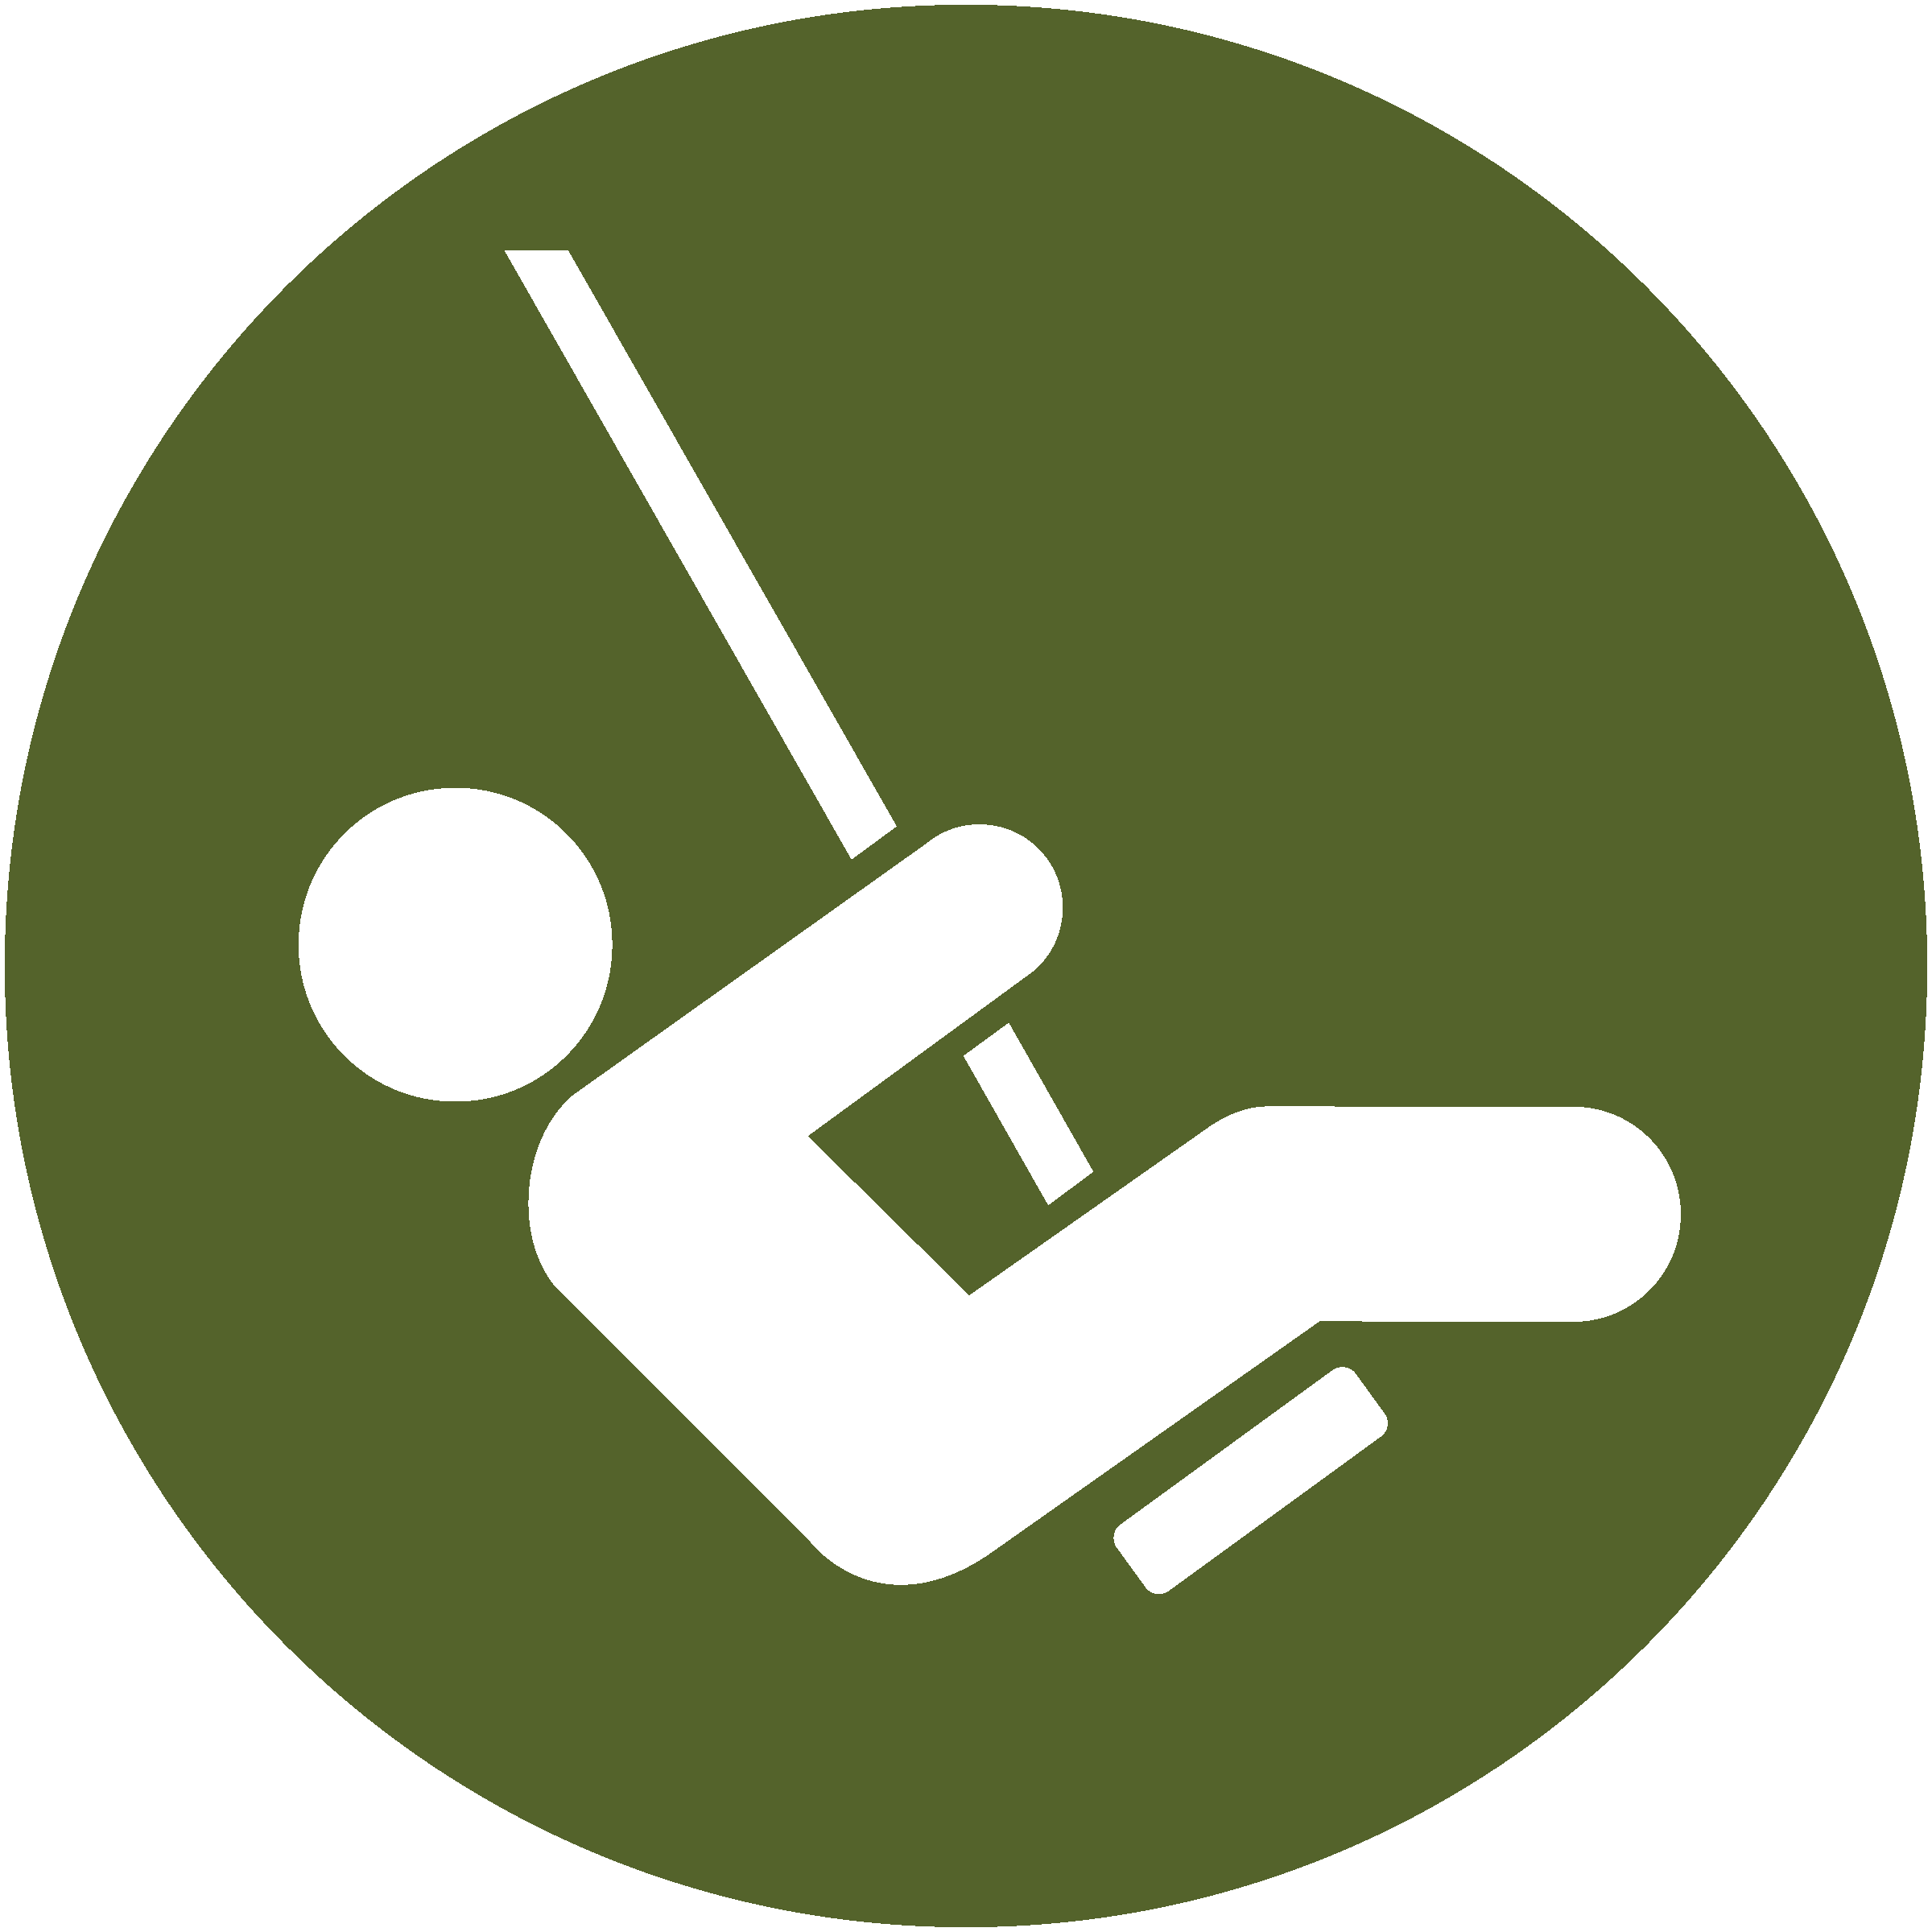 icon of person on swing